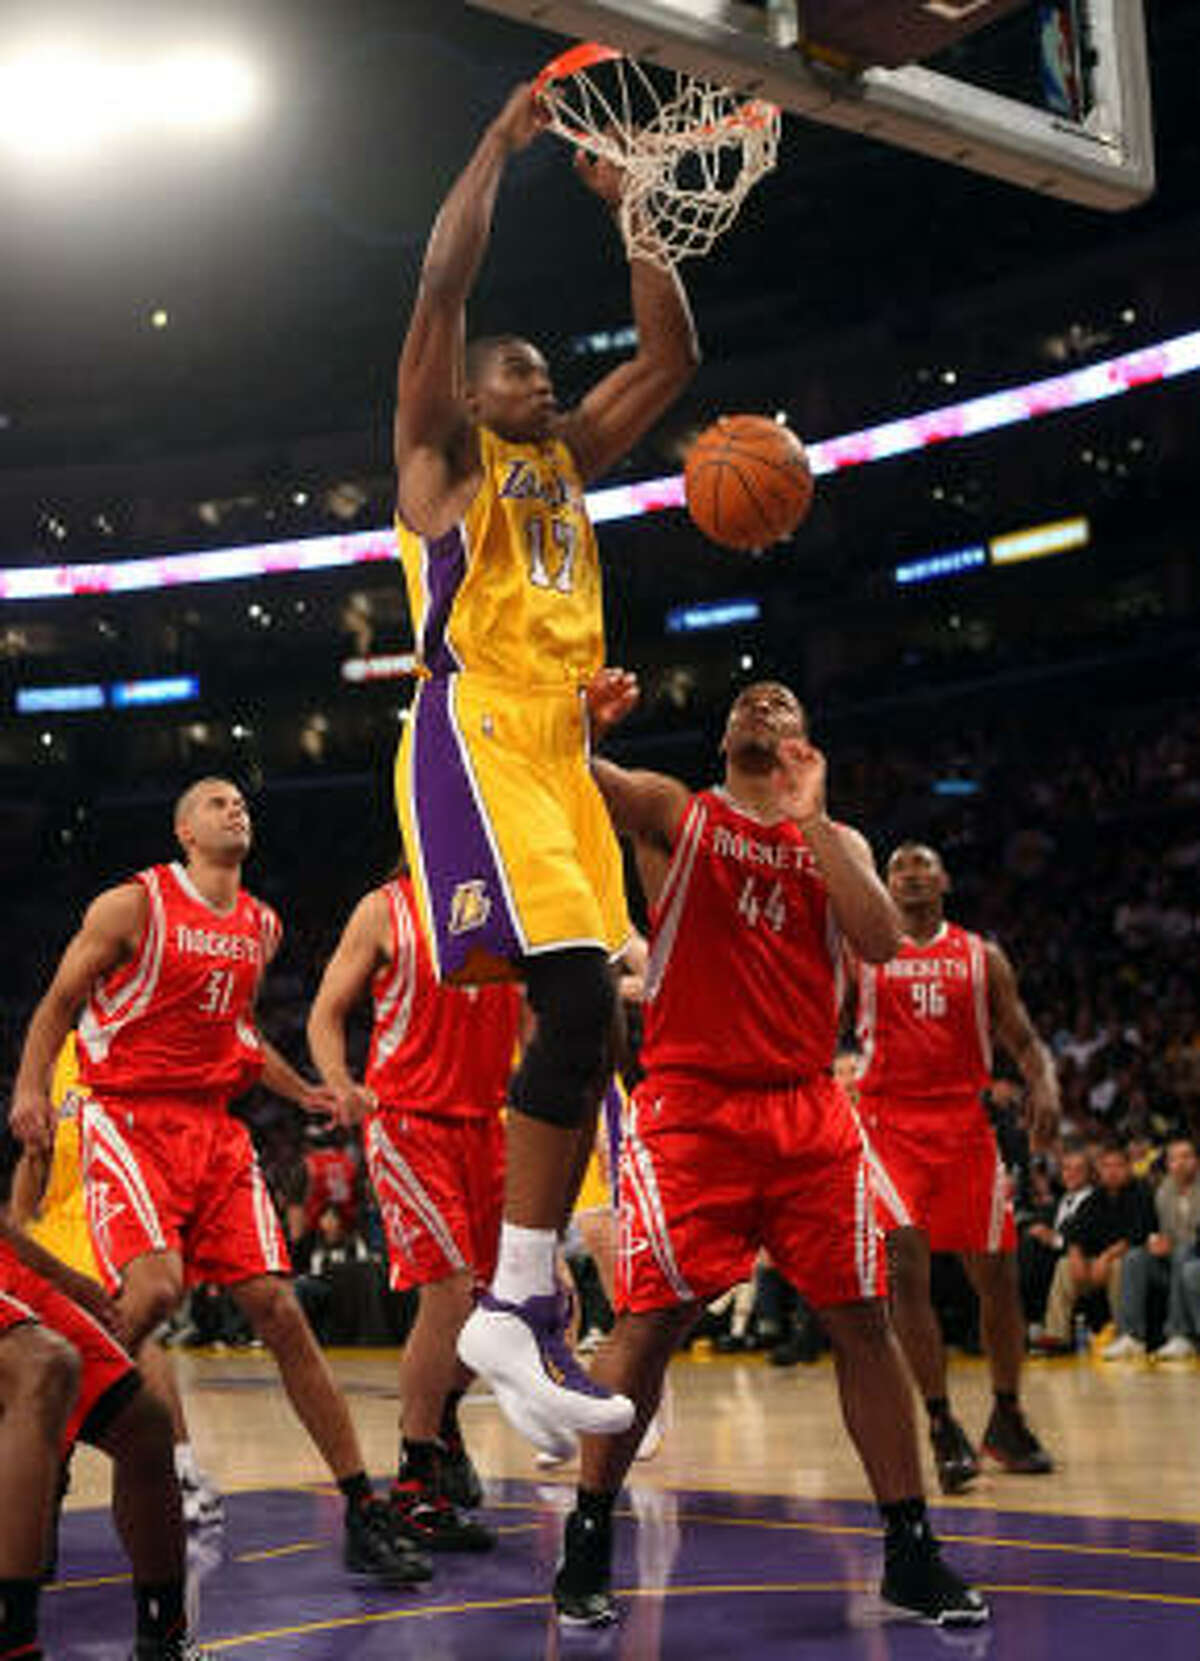 Andrew Bynum, shown dunking alongside Rockets defender Chuck Hayes, started and scored 14 points and grabbed six rebounds in the Lakers’ 118-78 win that put them with one win of eliminating the Rockets.